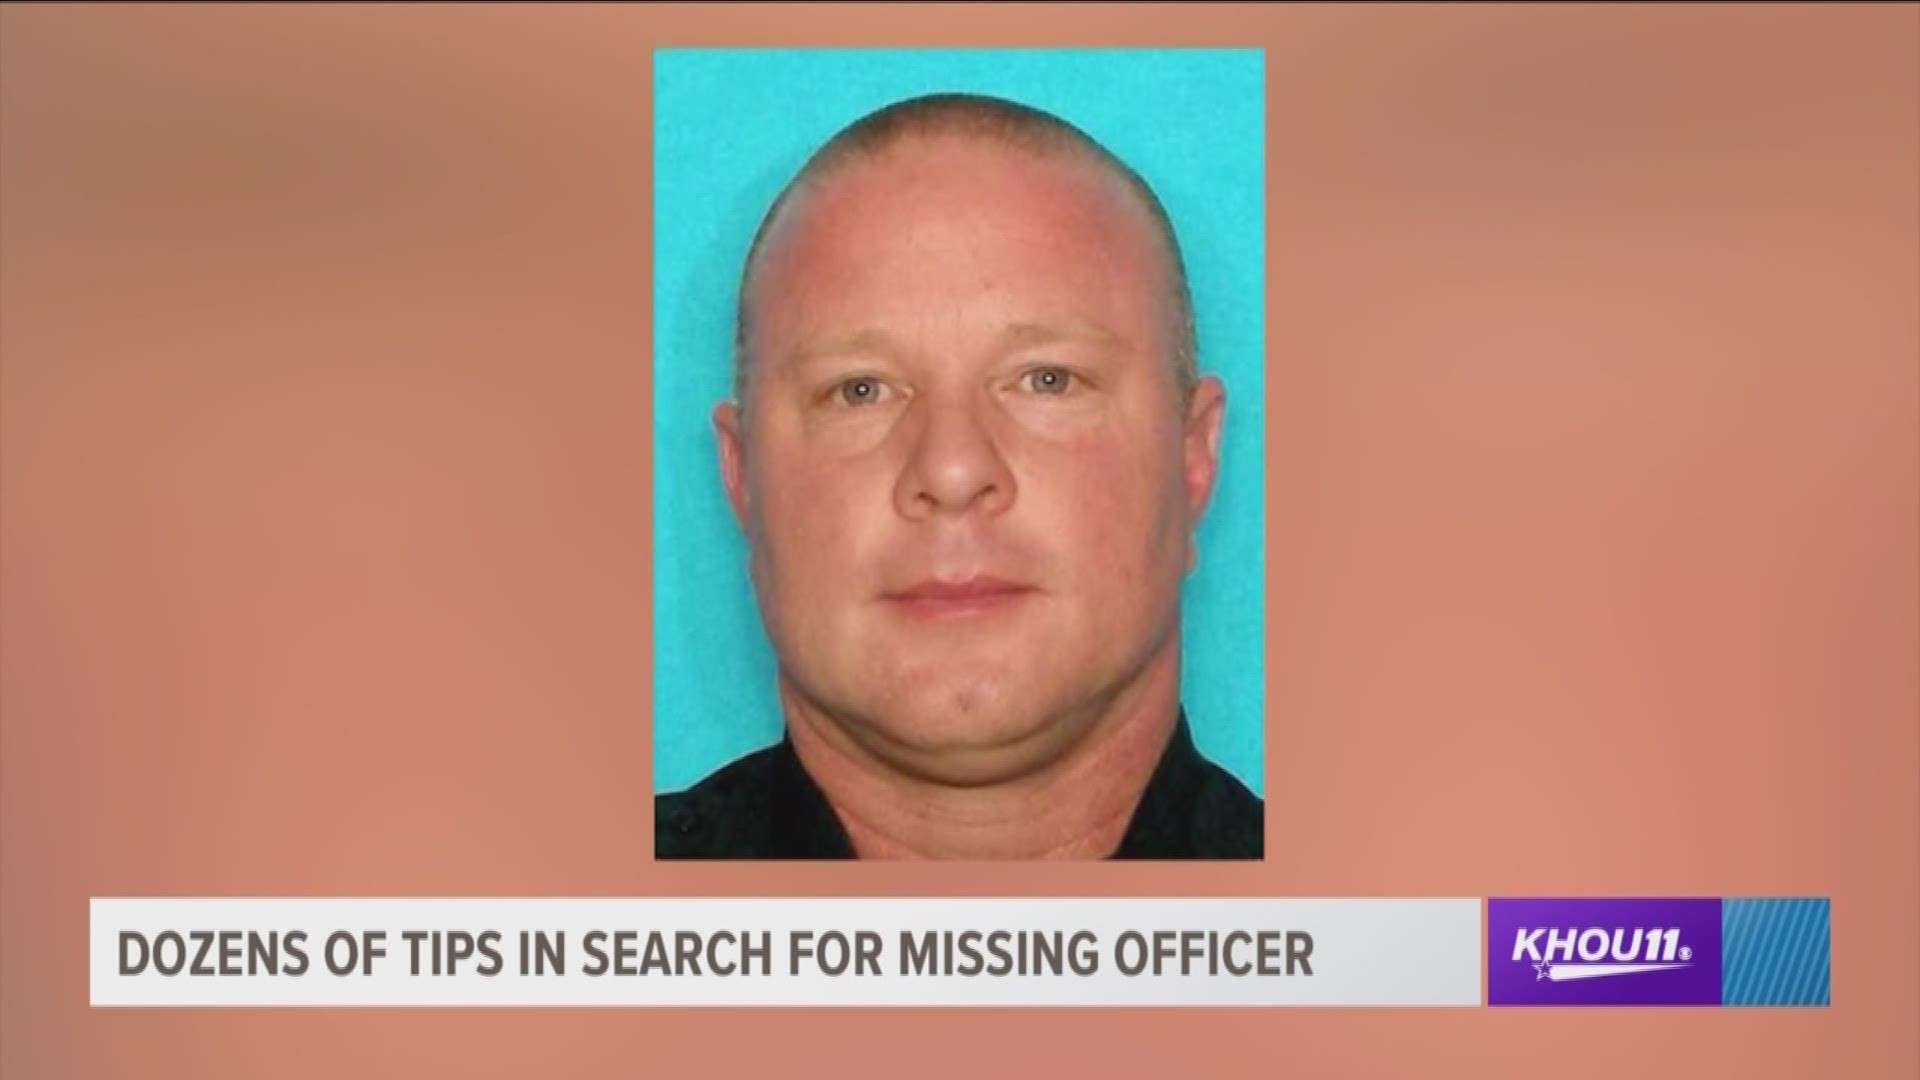 During a press conference Monday morning, Chambers County Sheriff Hawthorne says he believes missing Baytown Police officer Stewart Beasley is alive. 